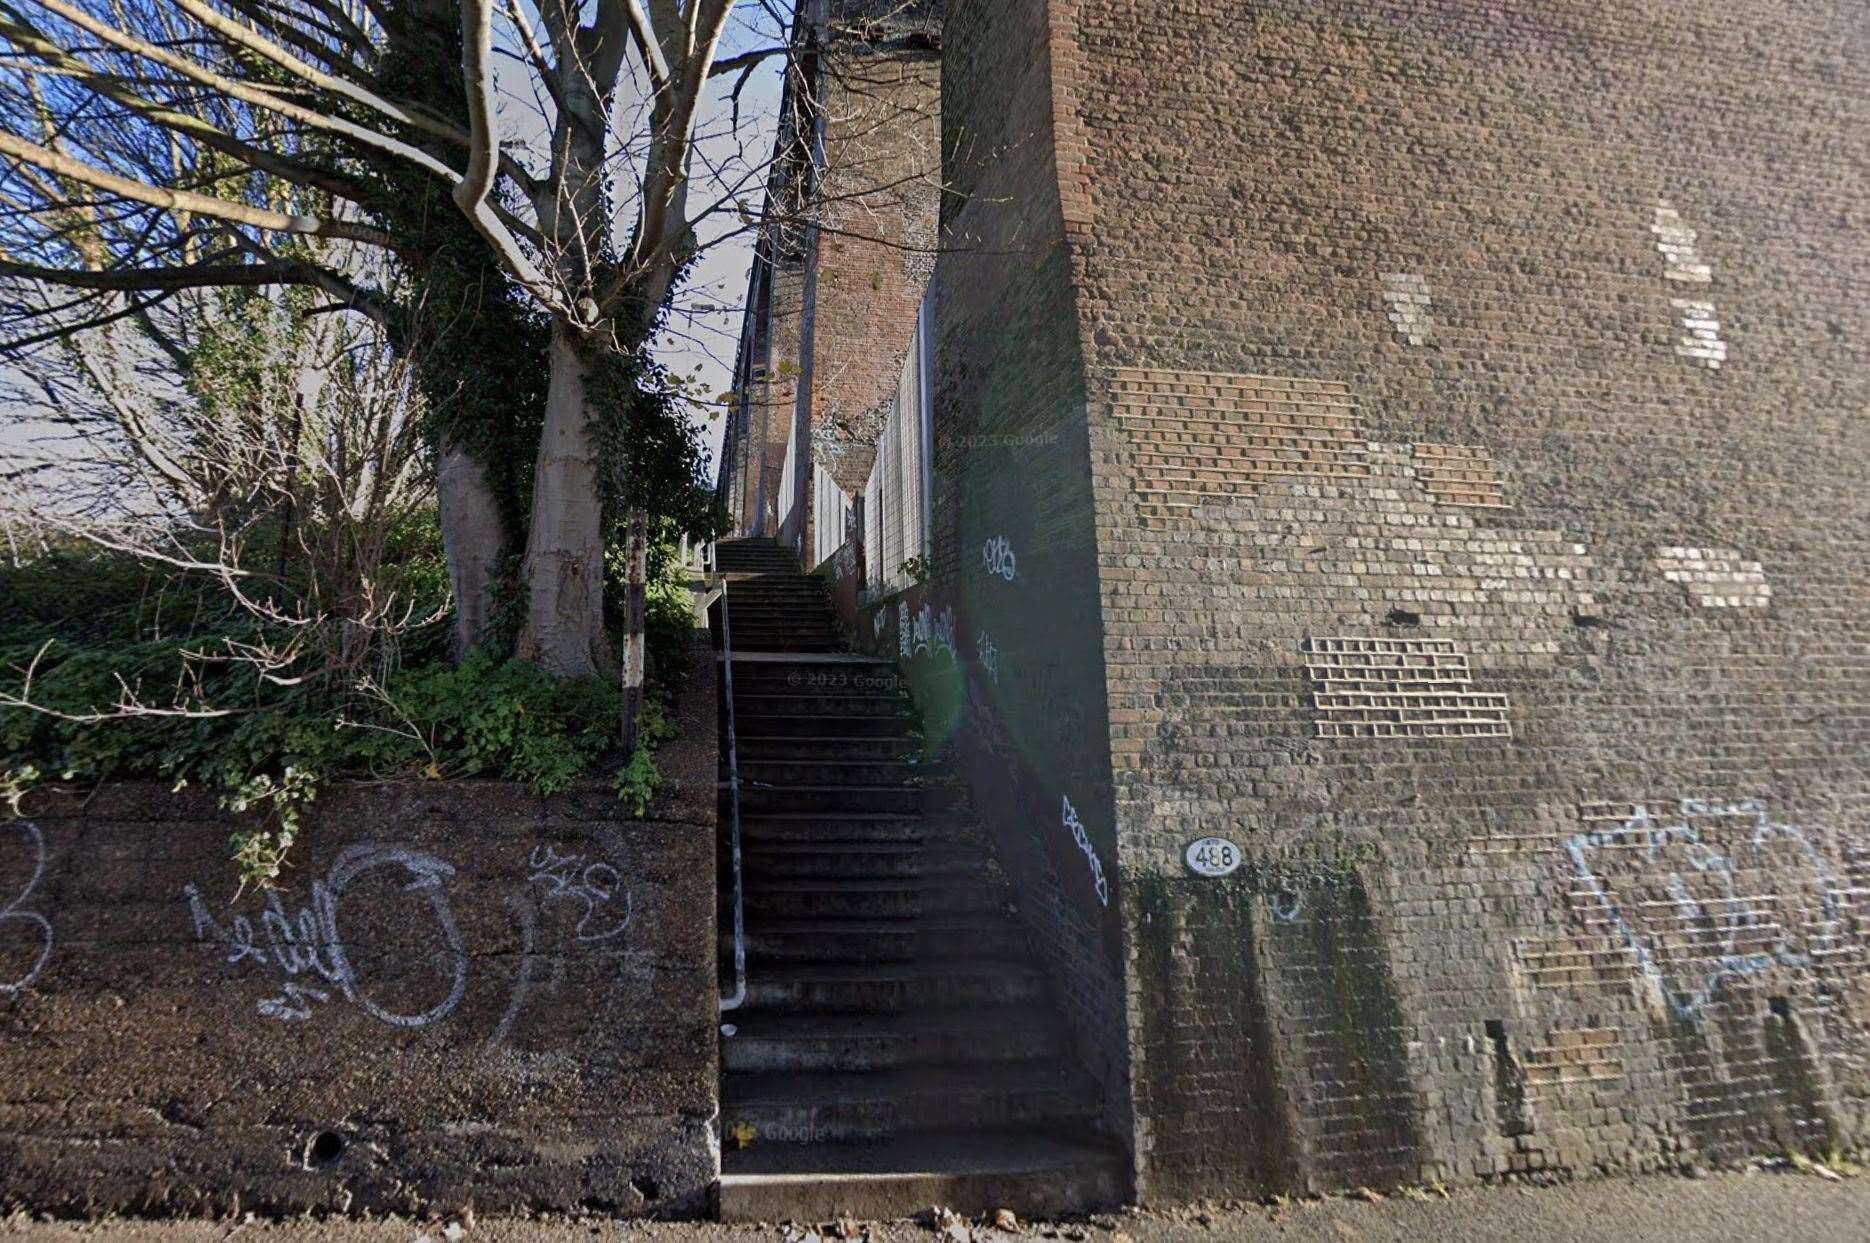 The reported robbery happened on steps in Bradstone Avenue, Folkestone. Picture: Google